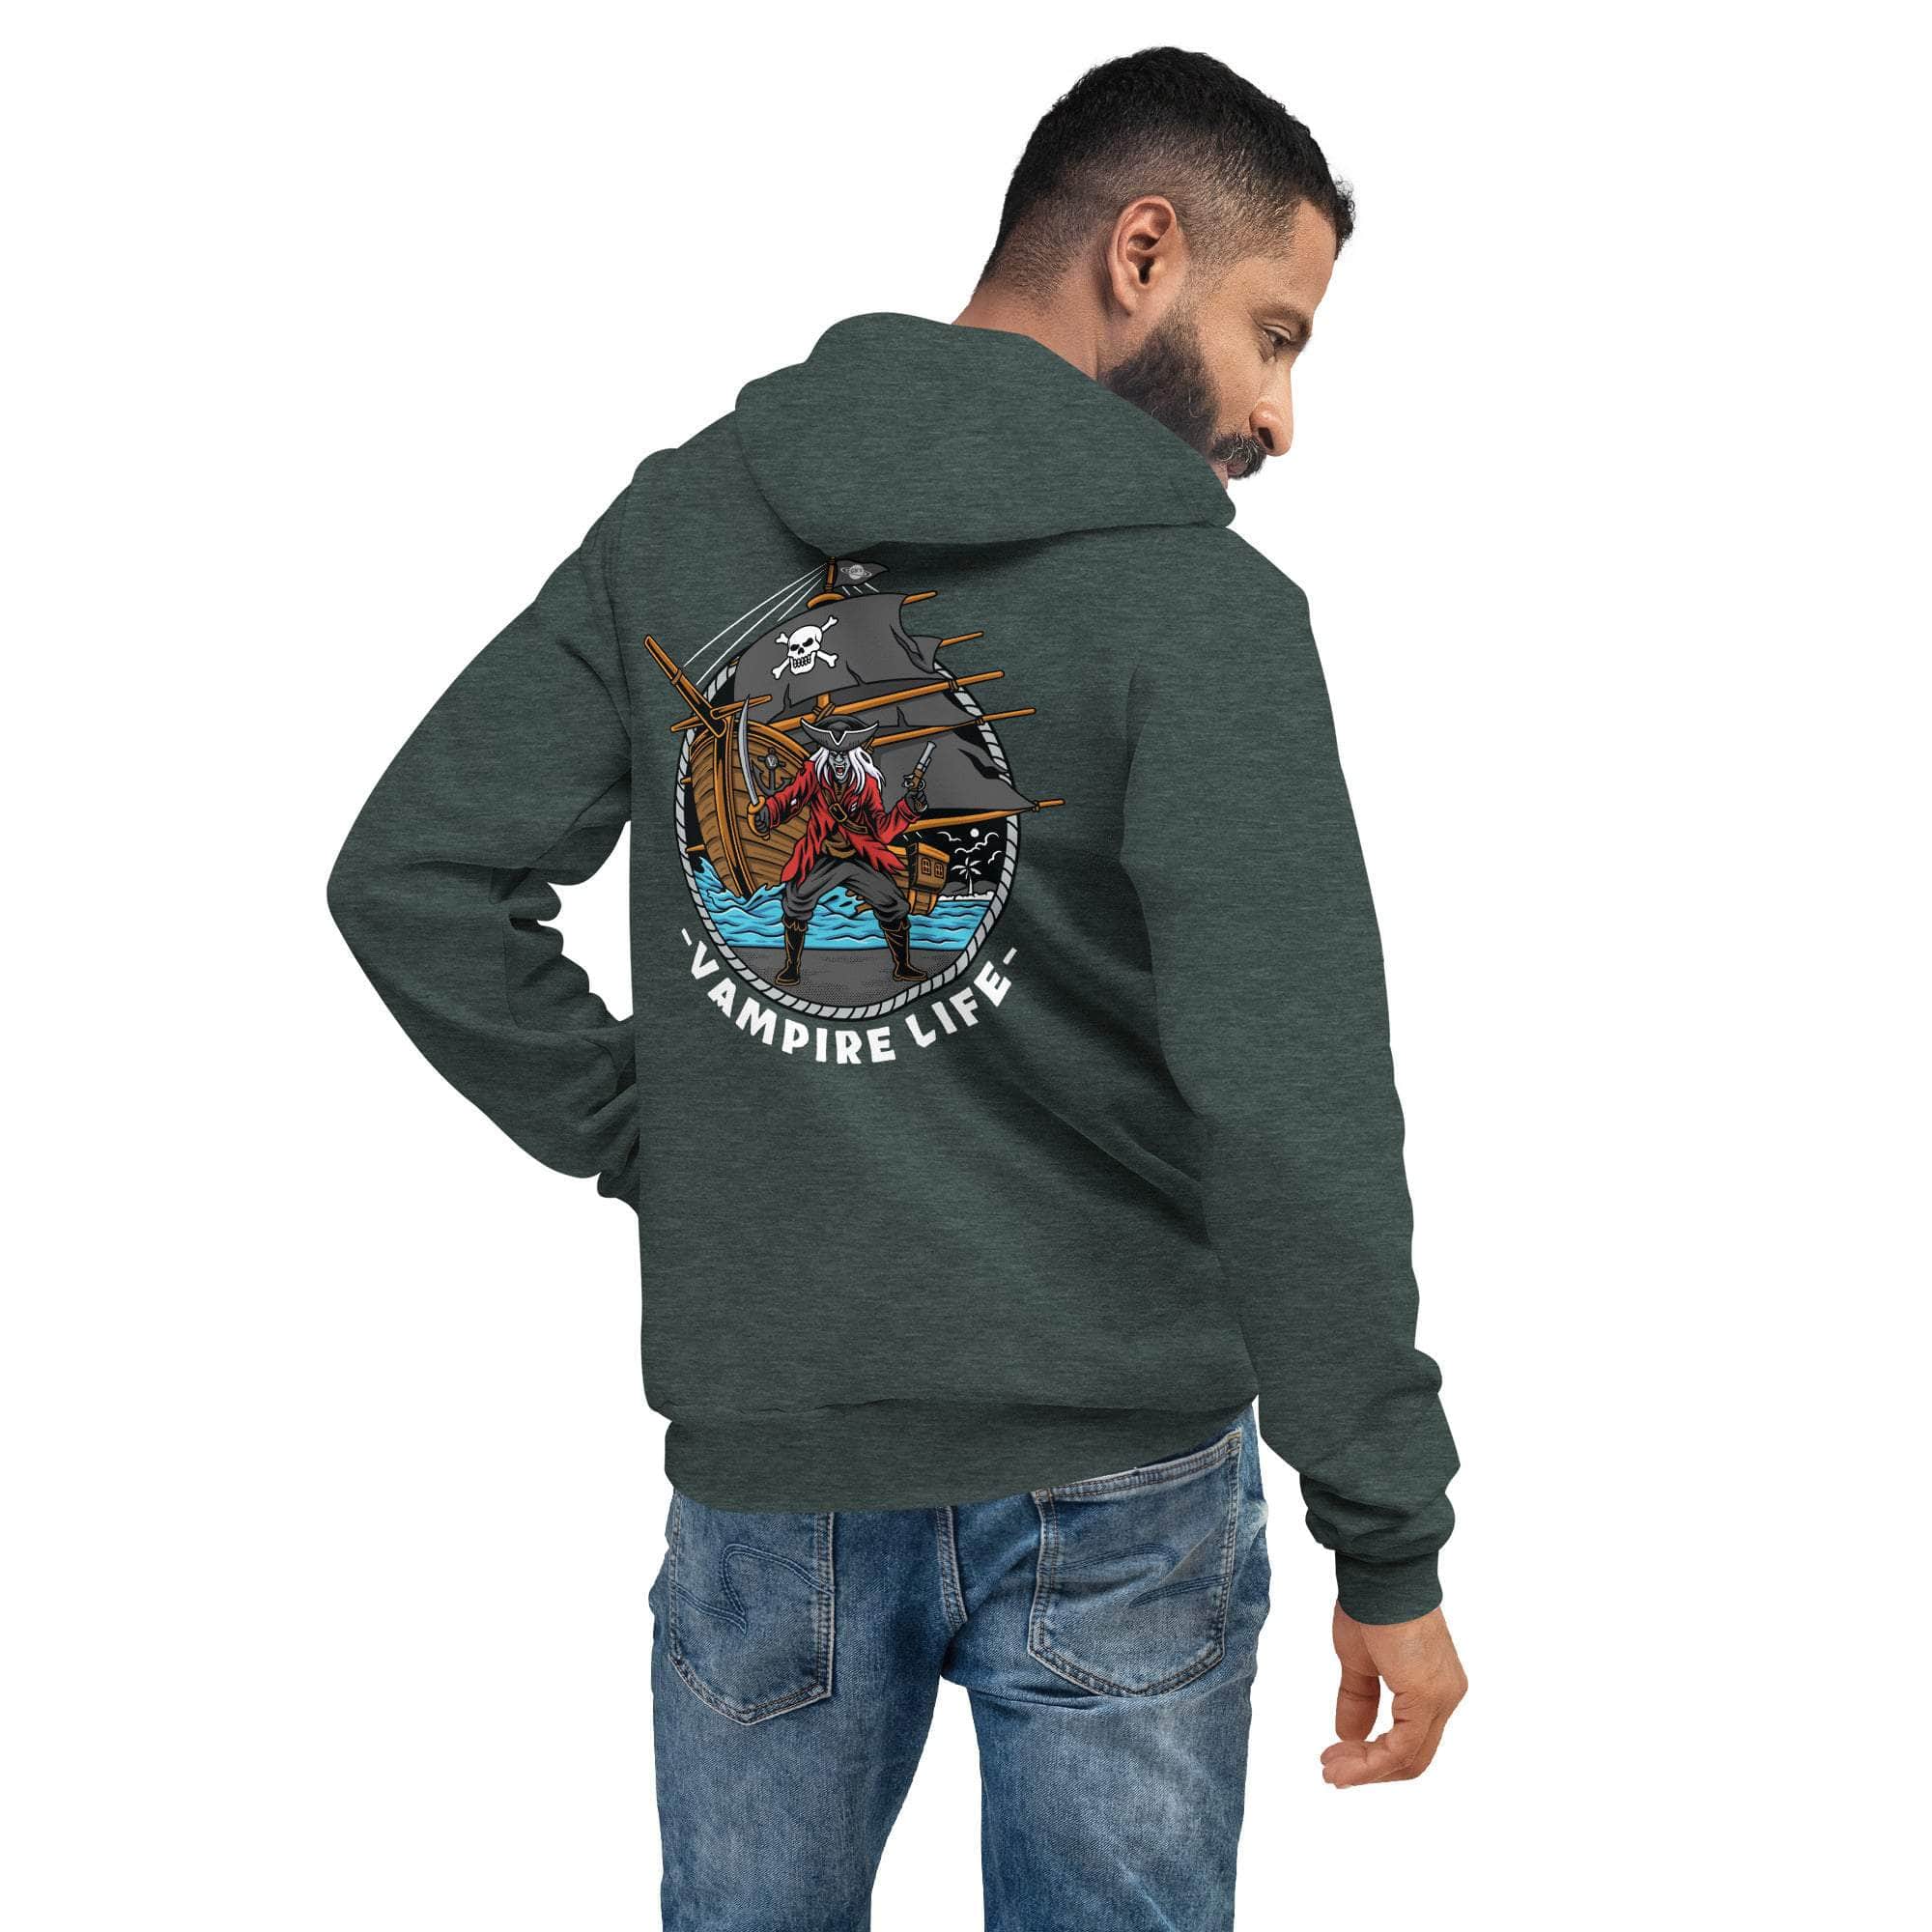 GBNY Heather Forest / S Vamp Life X GBNY "Bay Of Pirates" Super Soft Hoodie - Men's 2637373_9245